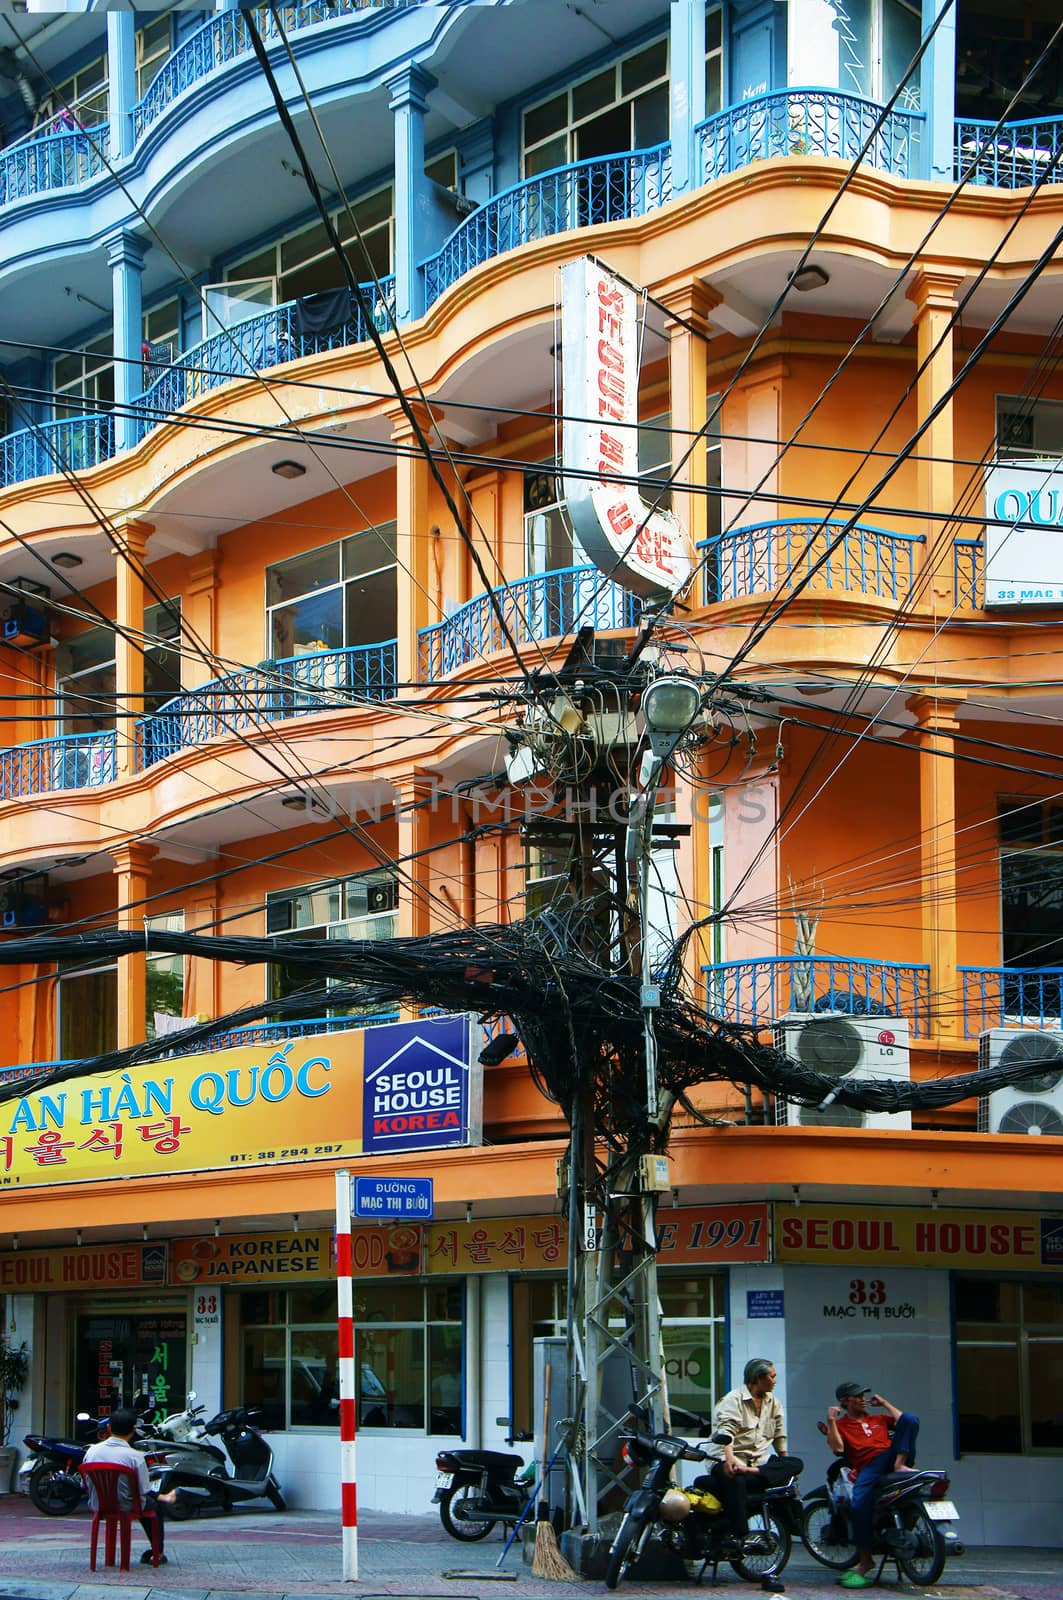 HO CHI MINH CITY, VIET NAM- OCTOBER 24: Colorful house of city and electric wire network in Sai Gon, VietNam on October 24, 2013